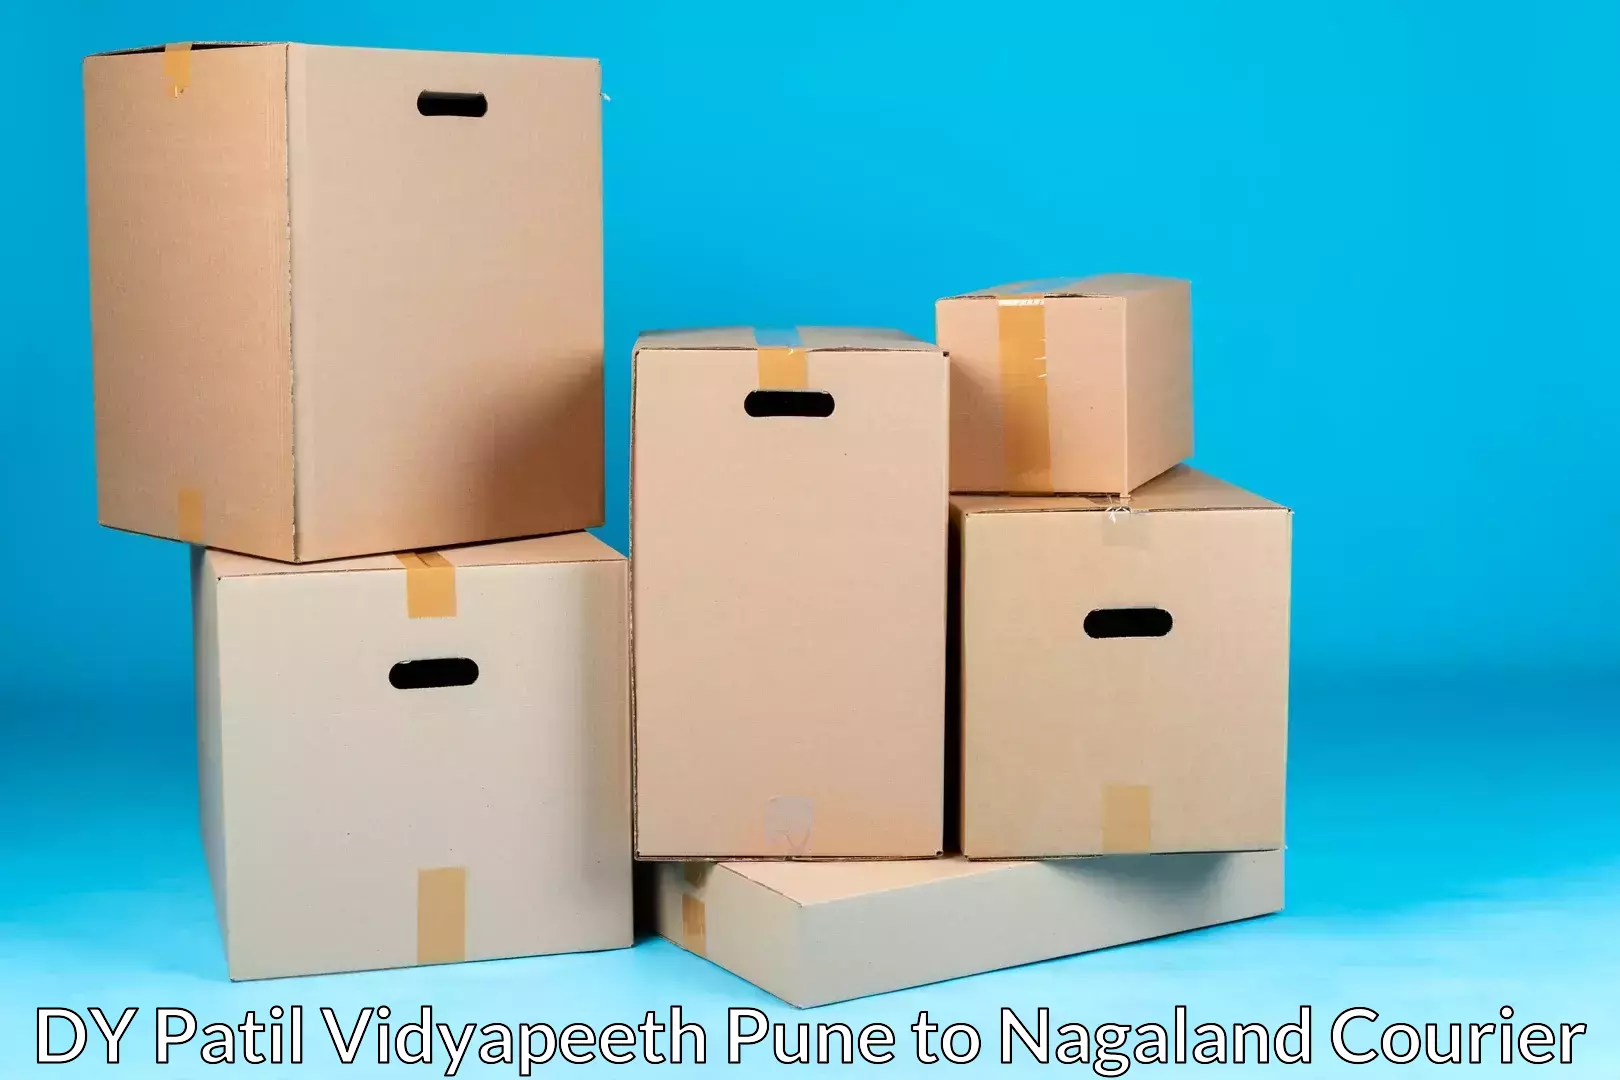 Home relocation experts DY Patil Vidyapeeth Pune to Mokokchung